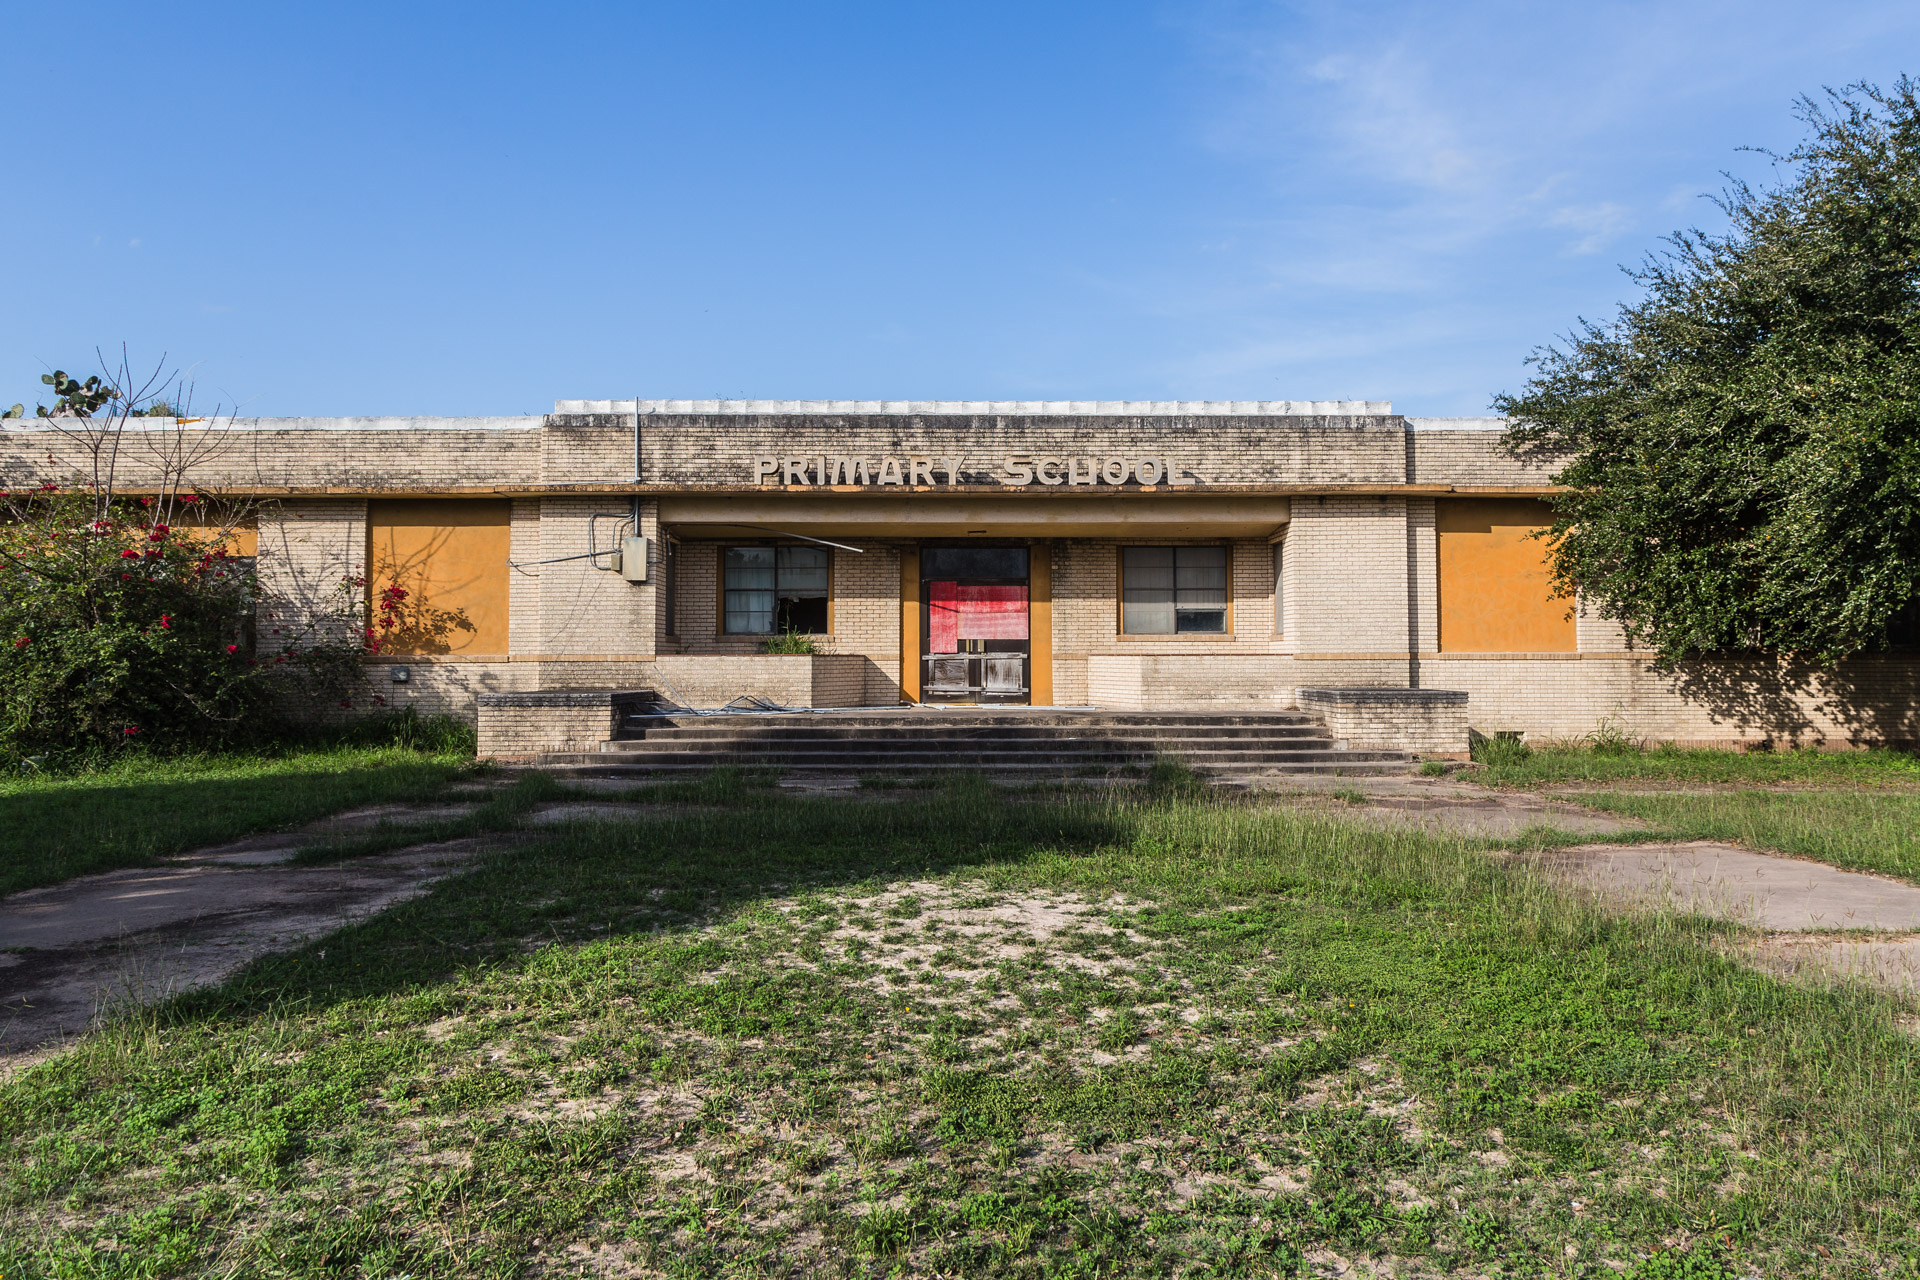 Premont, Texas - An Old Primary School